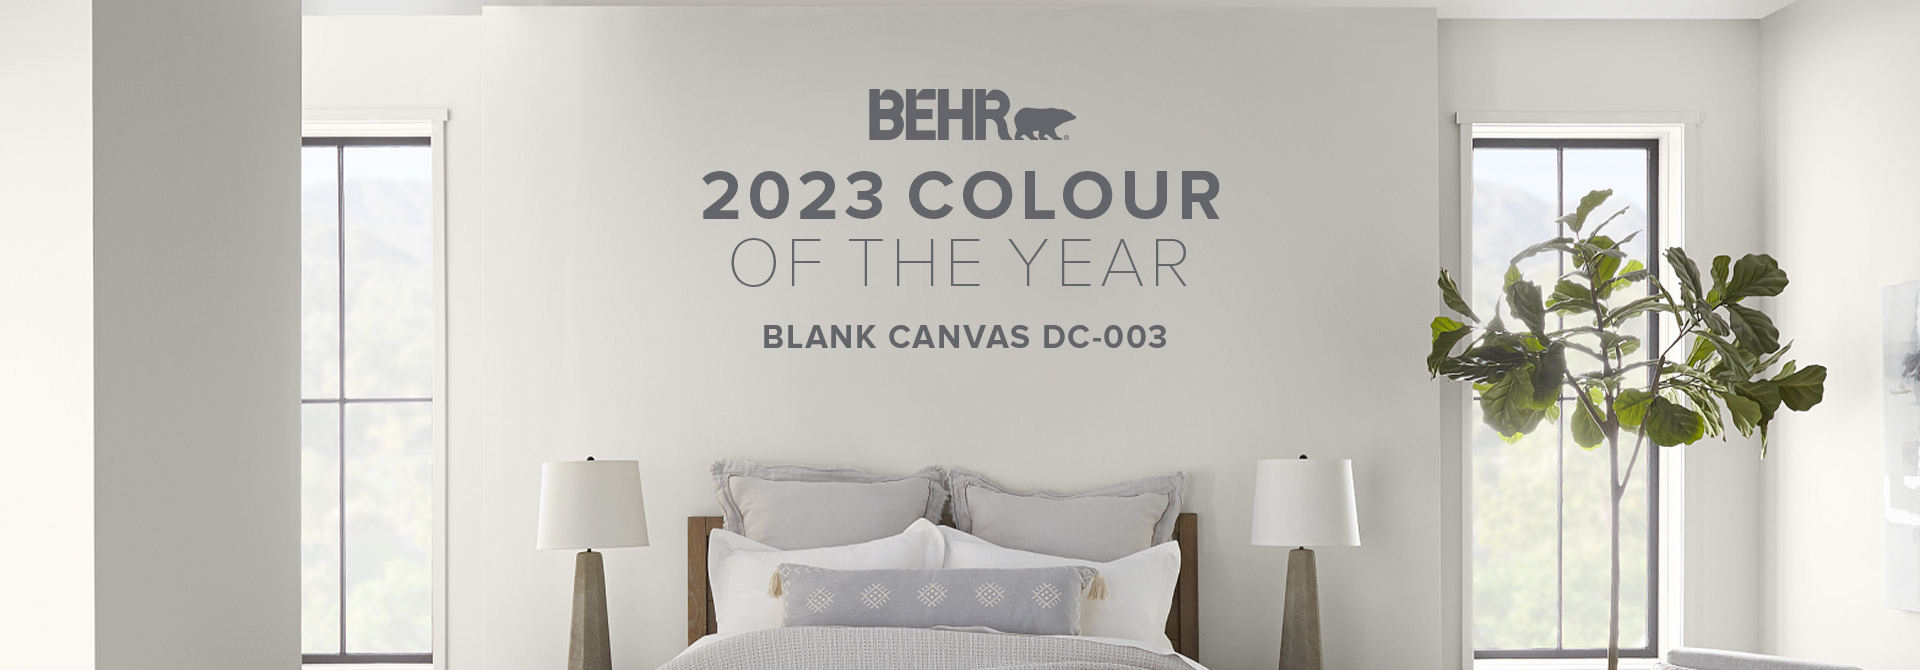 Room image featuring Blank Canvas, Behr 2023 Color of the Year.